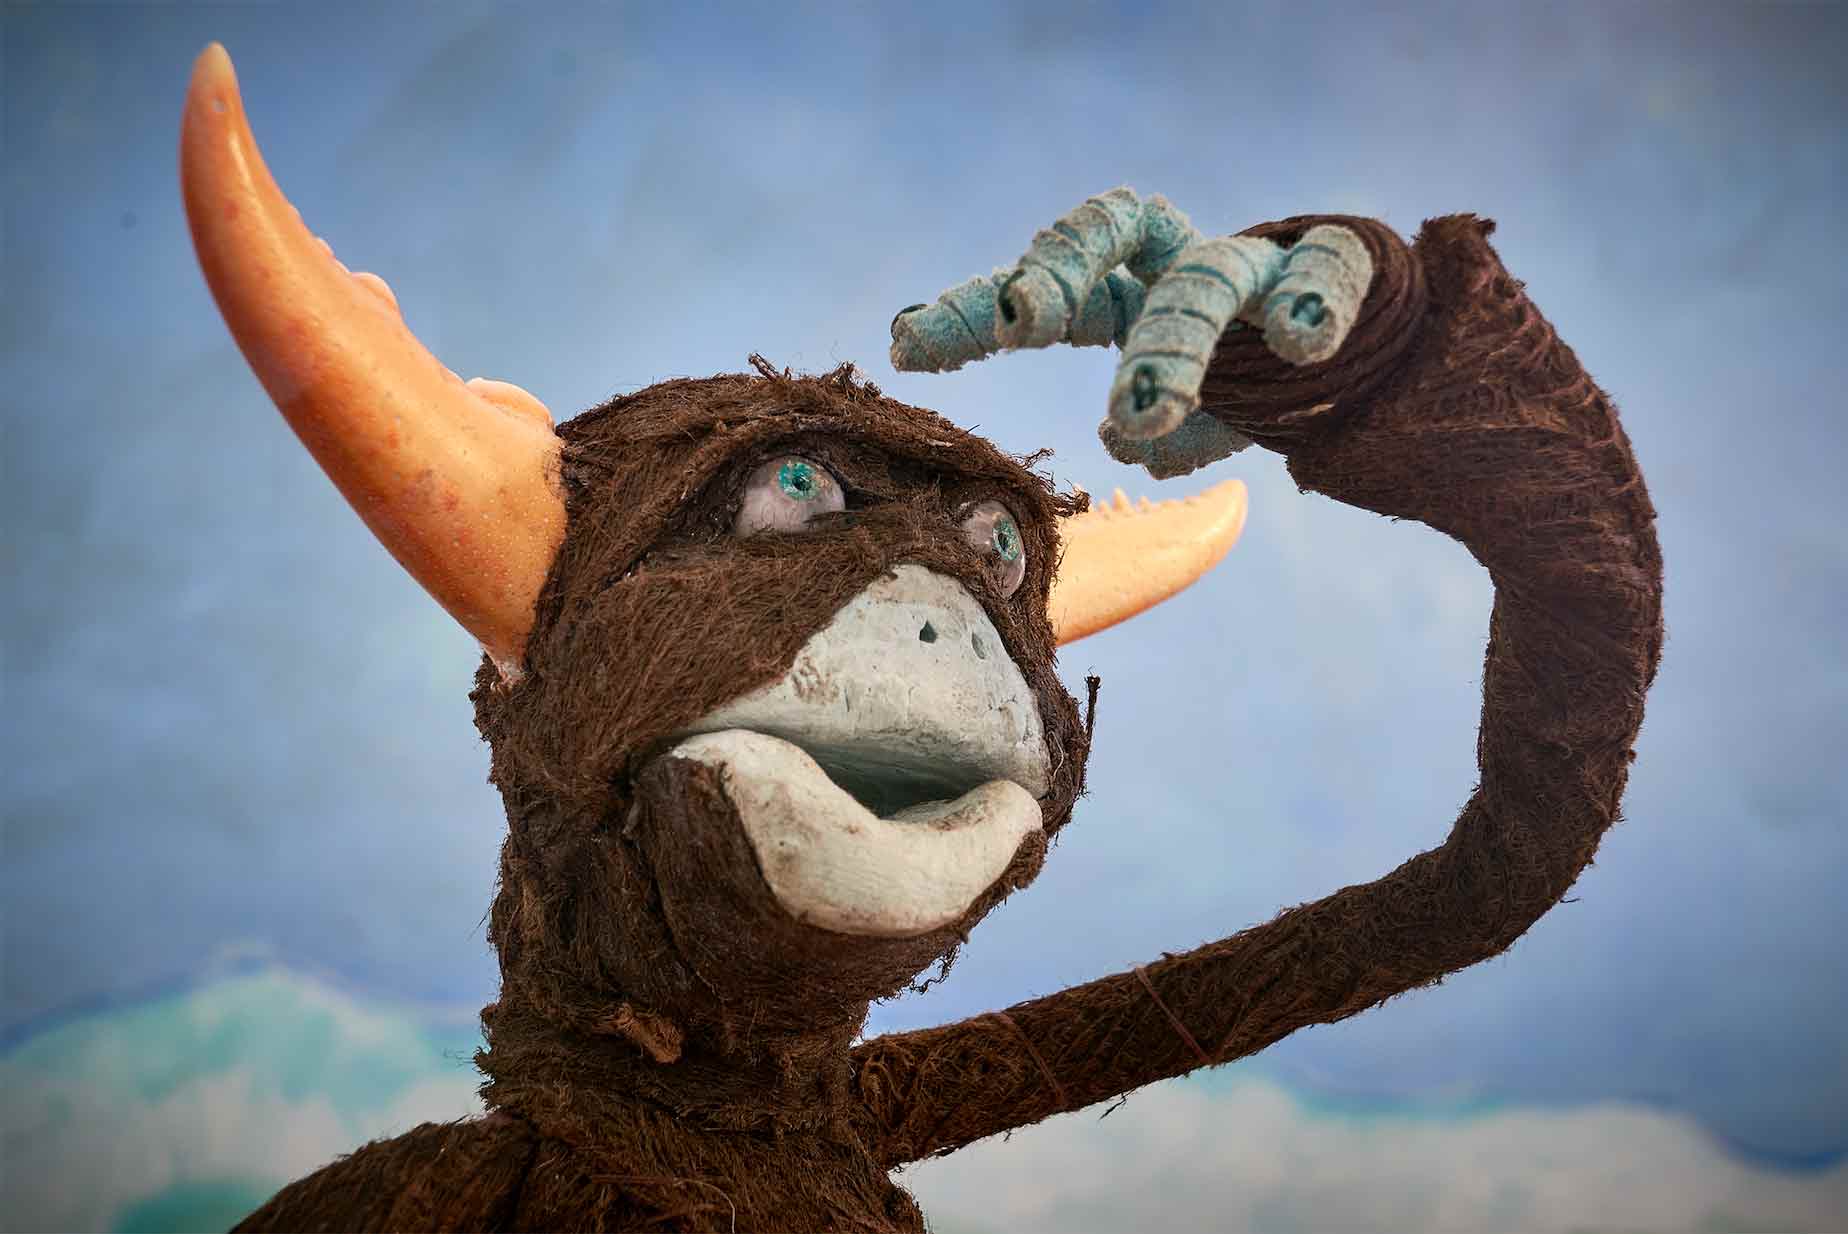 A stop motion character looks out over the landscape in search of something. The character's face is made with air-dry clay and covered in bark cloth. He has horns.